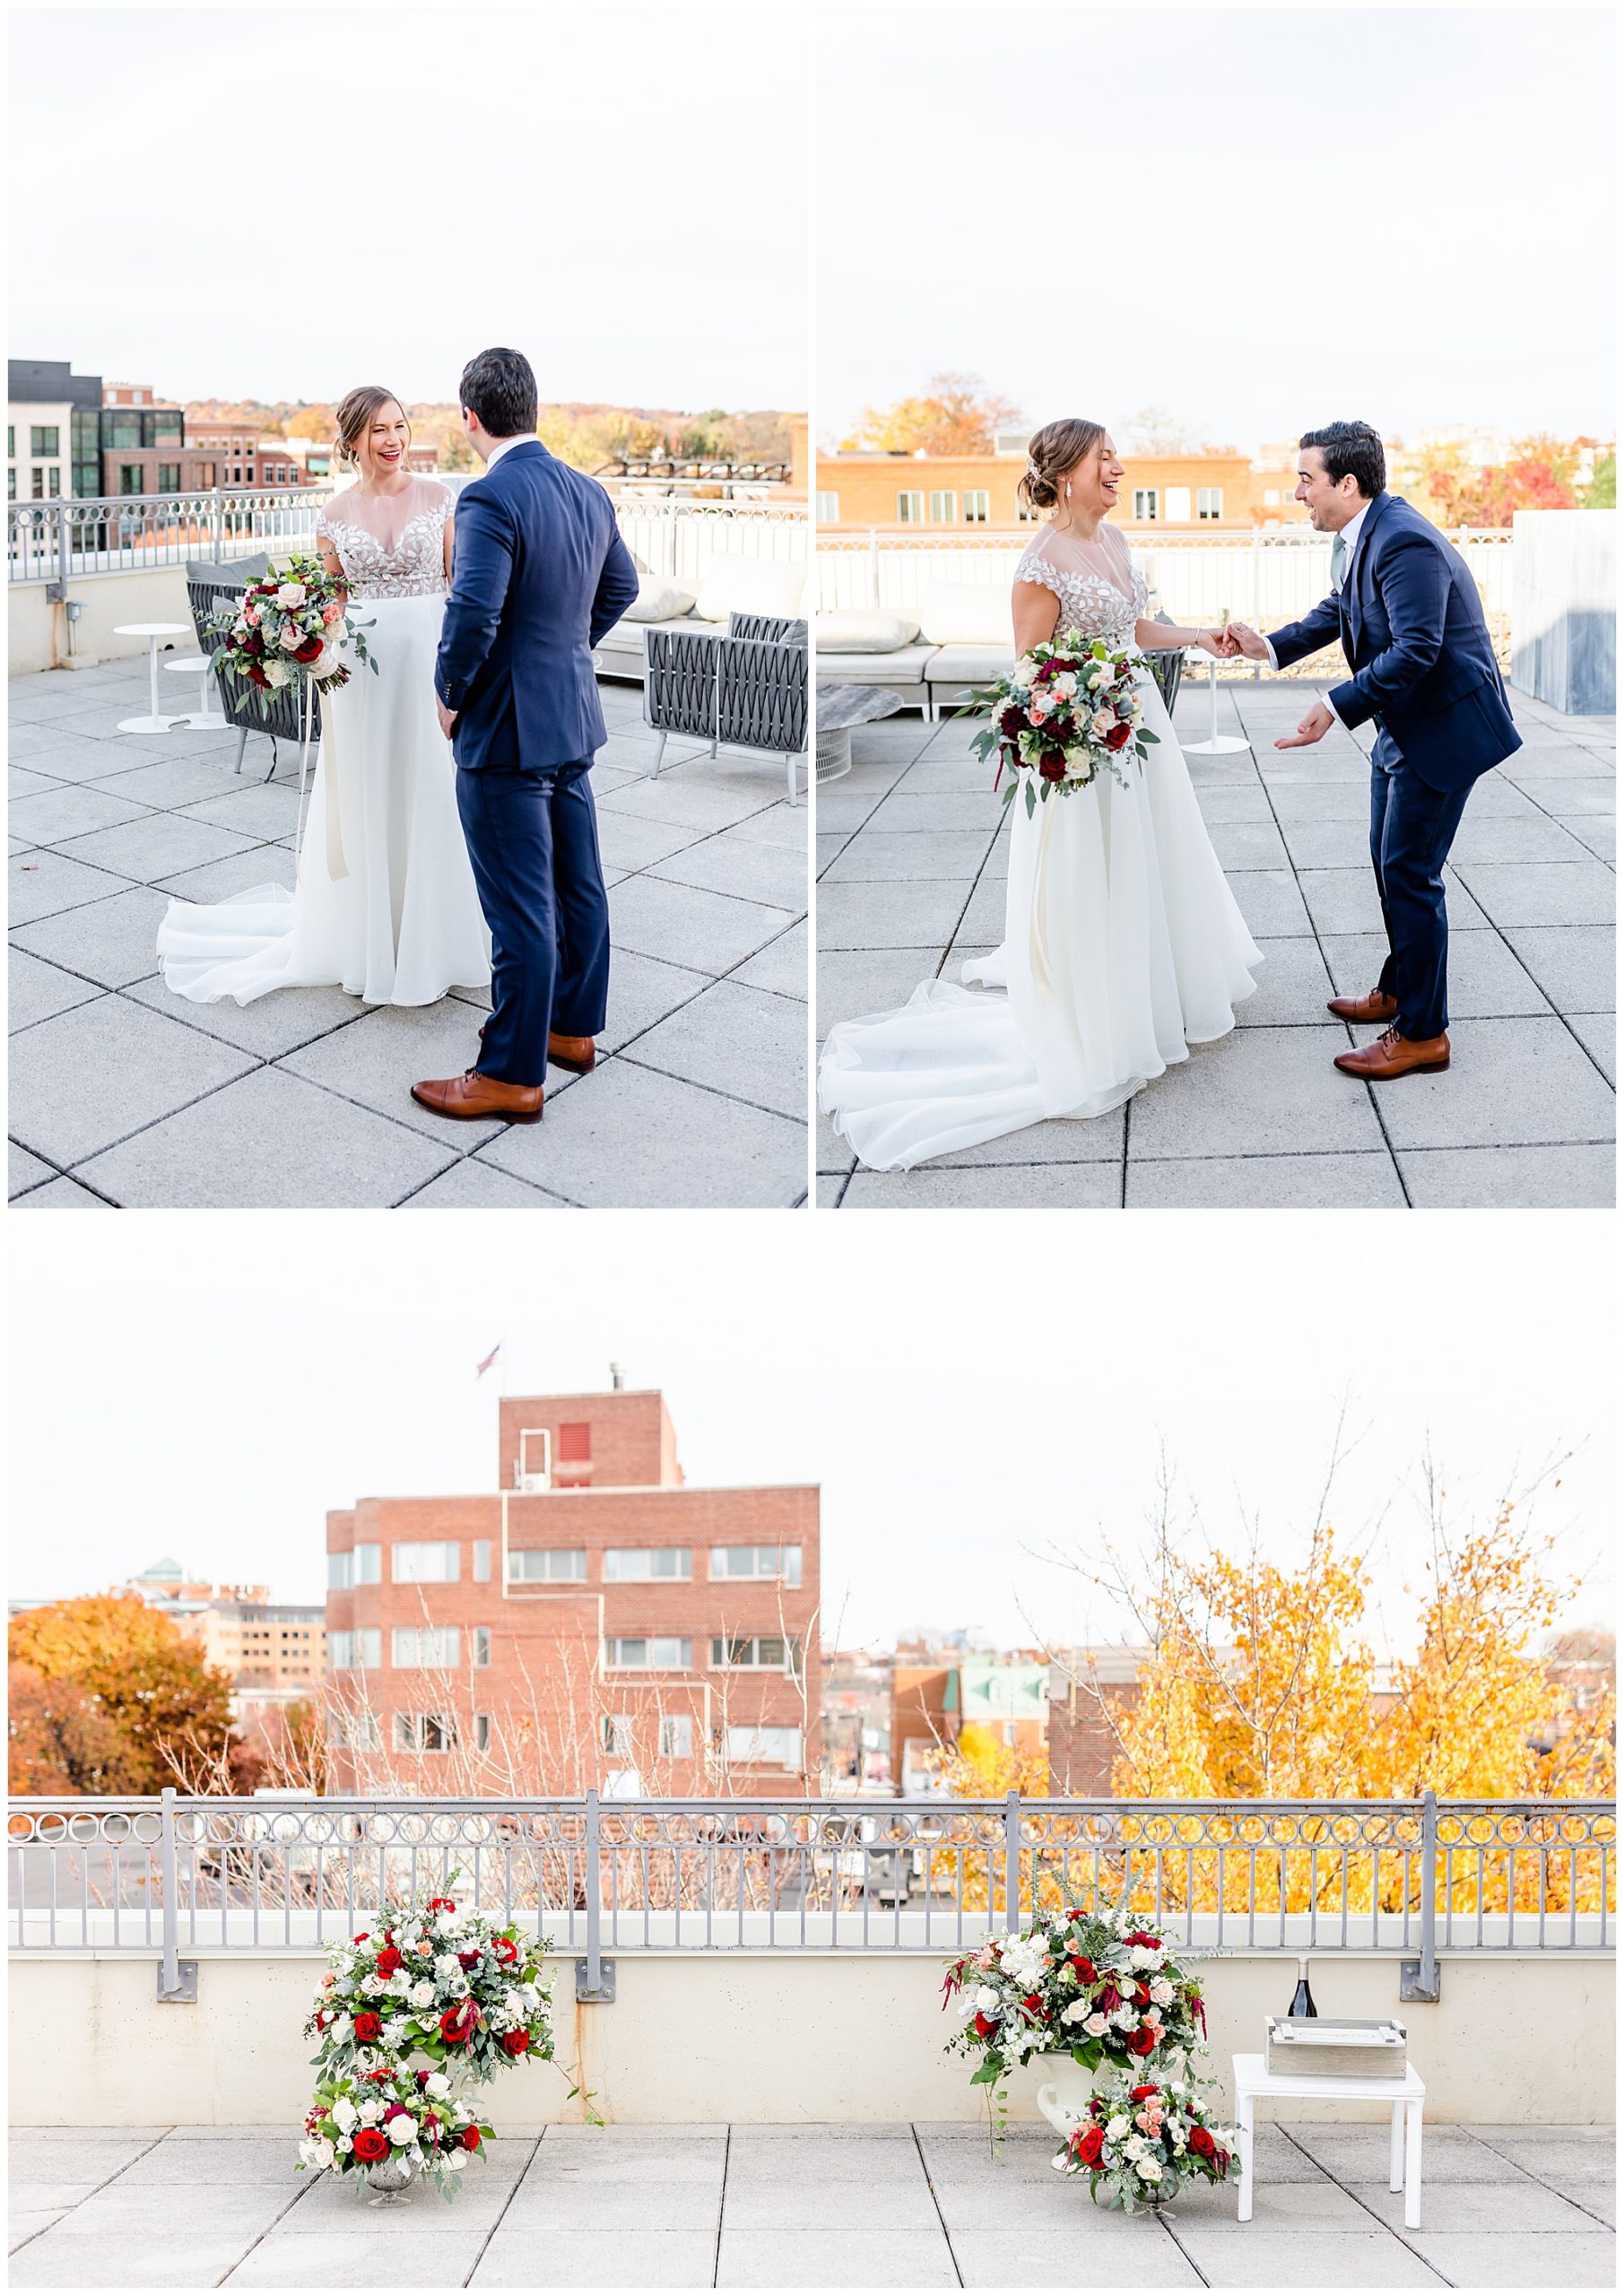 Lorien Alexandria winter wedding, Old Town Alexandria wedding, Alexandria Virginia wedding, DC micro wedding, northern Virginia wedding photographer, Alexandria Virginia wedding photographer, DC wedding photographer, winter wedding aesthetic, Rachel E.H. Photography, bride and groom doing first look, wedding later on rooftop